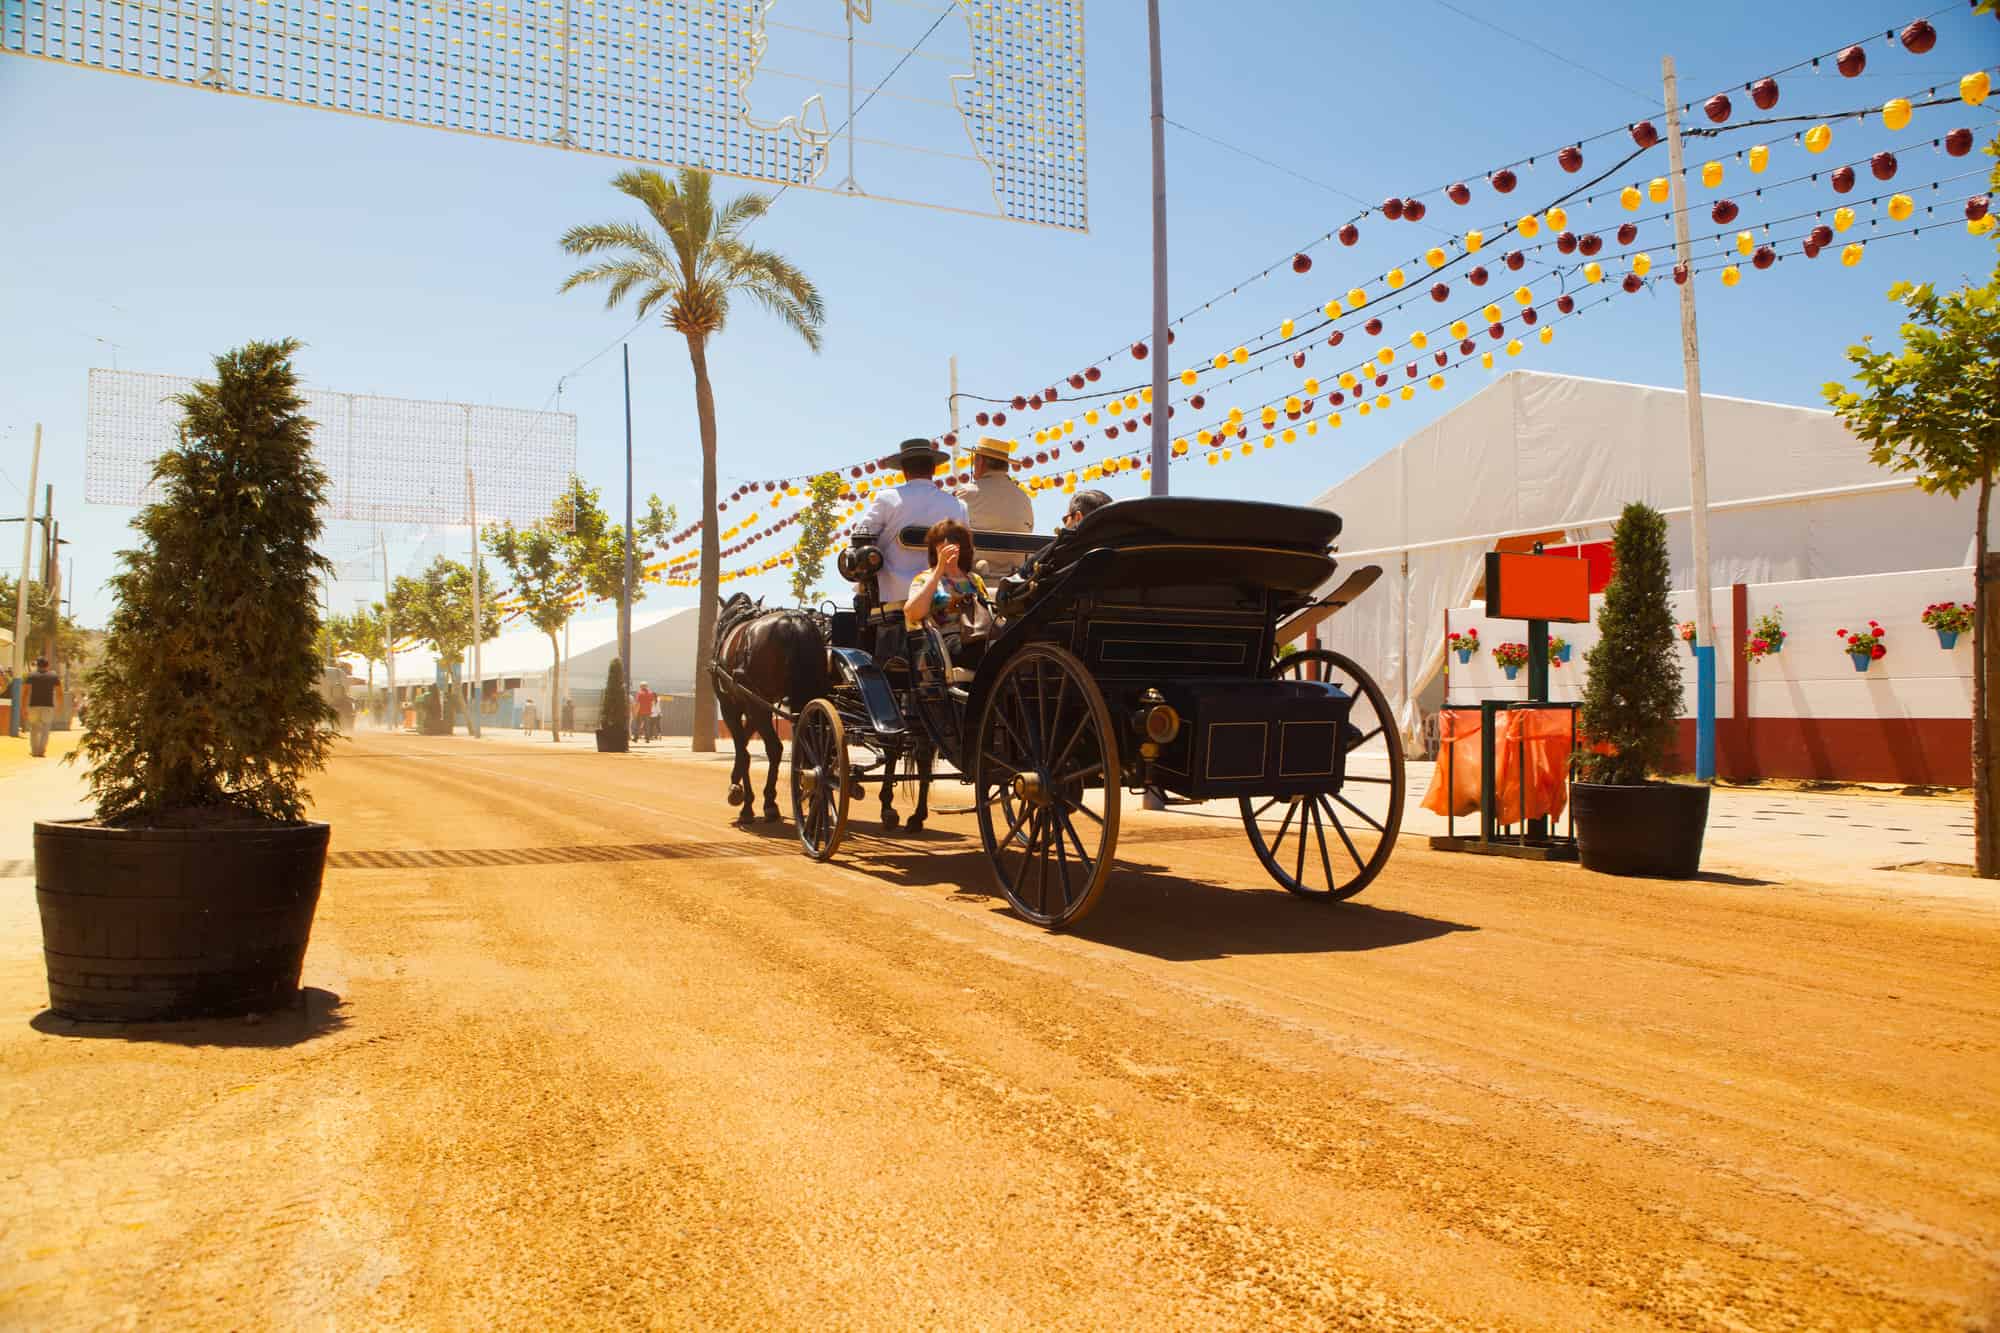 People in a horse carriage at the fair in Seville during March